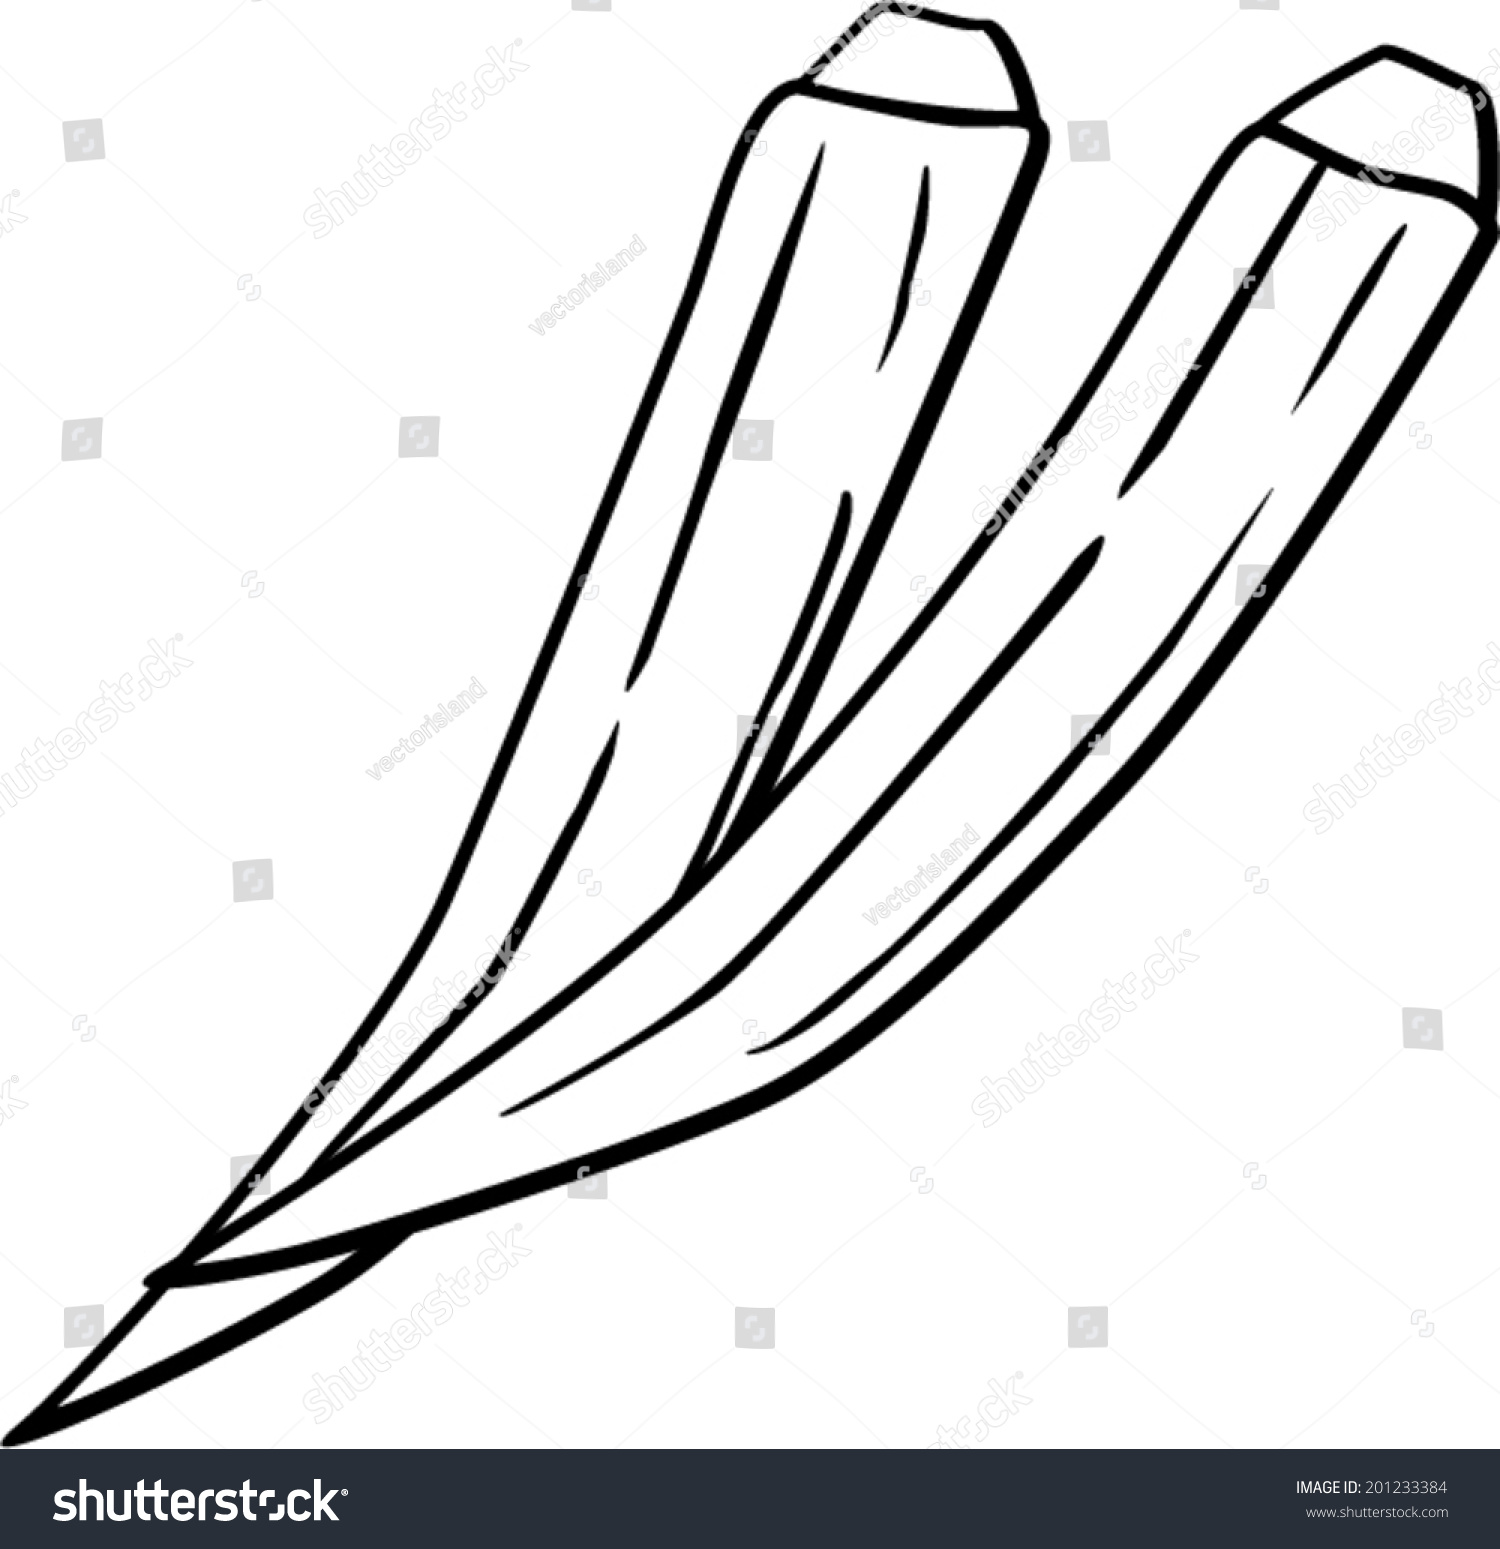 Okra black and white clipart